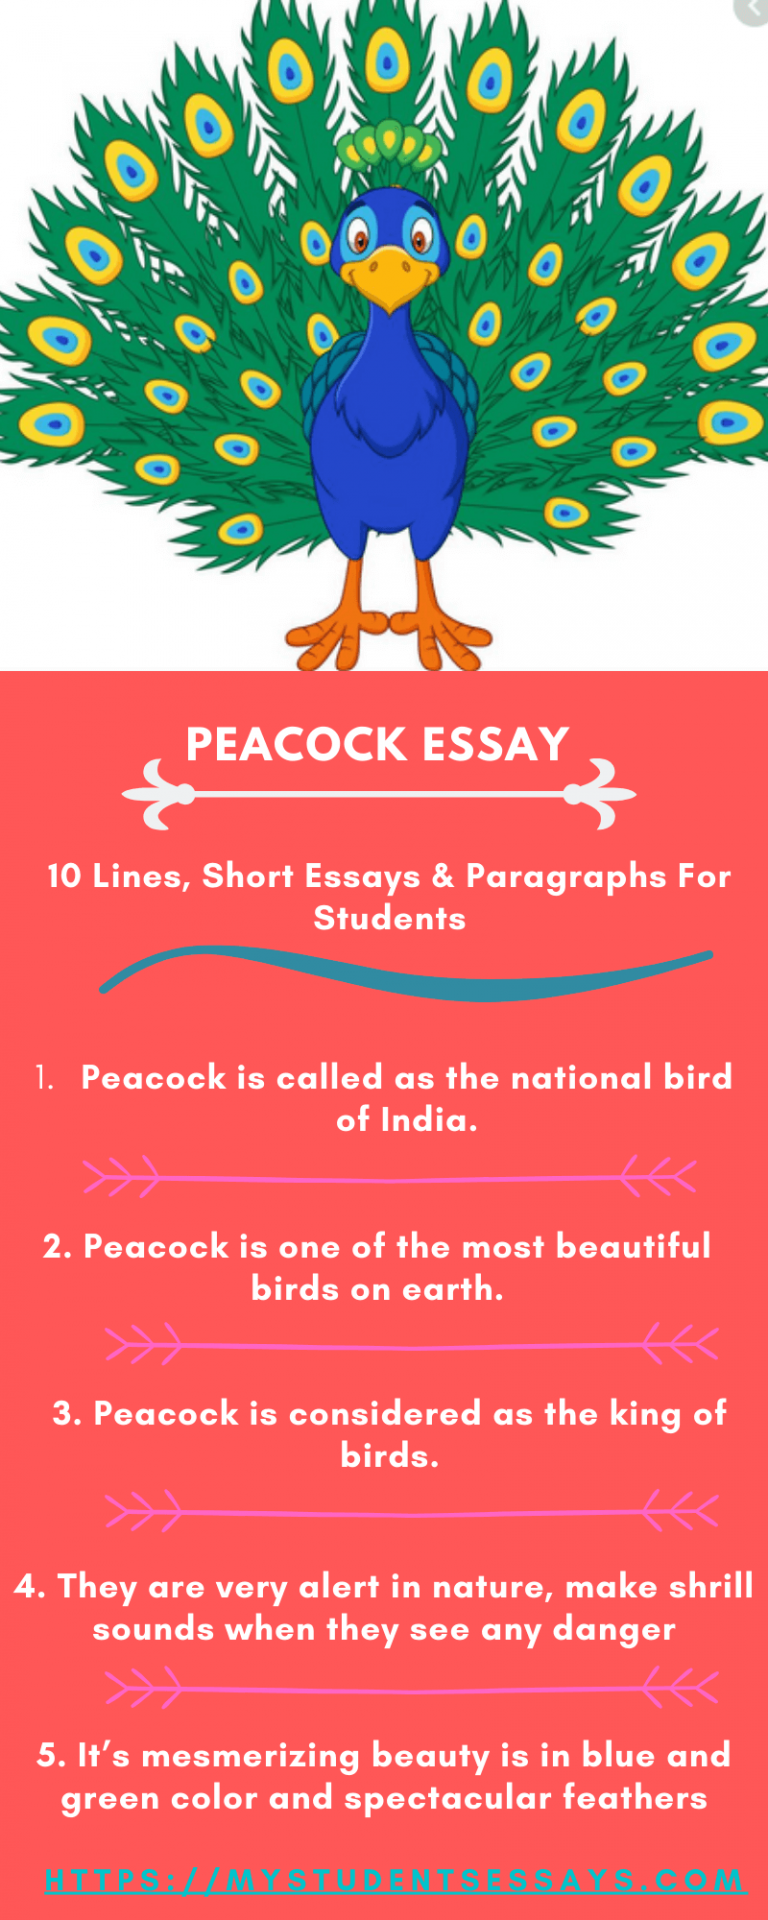 peacock paragraph essay in english